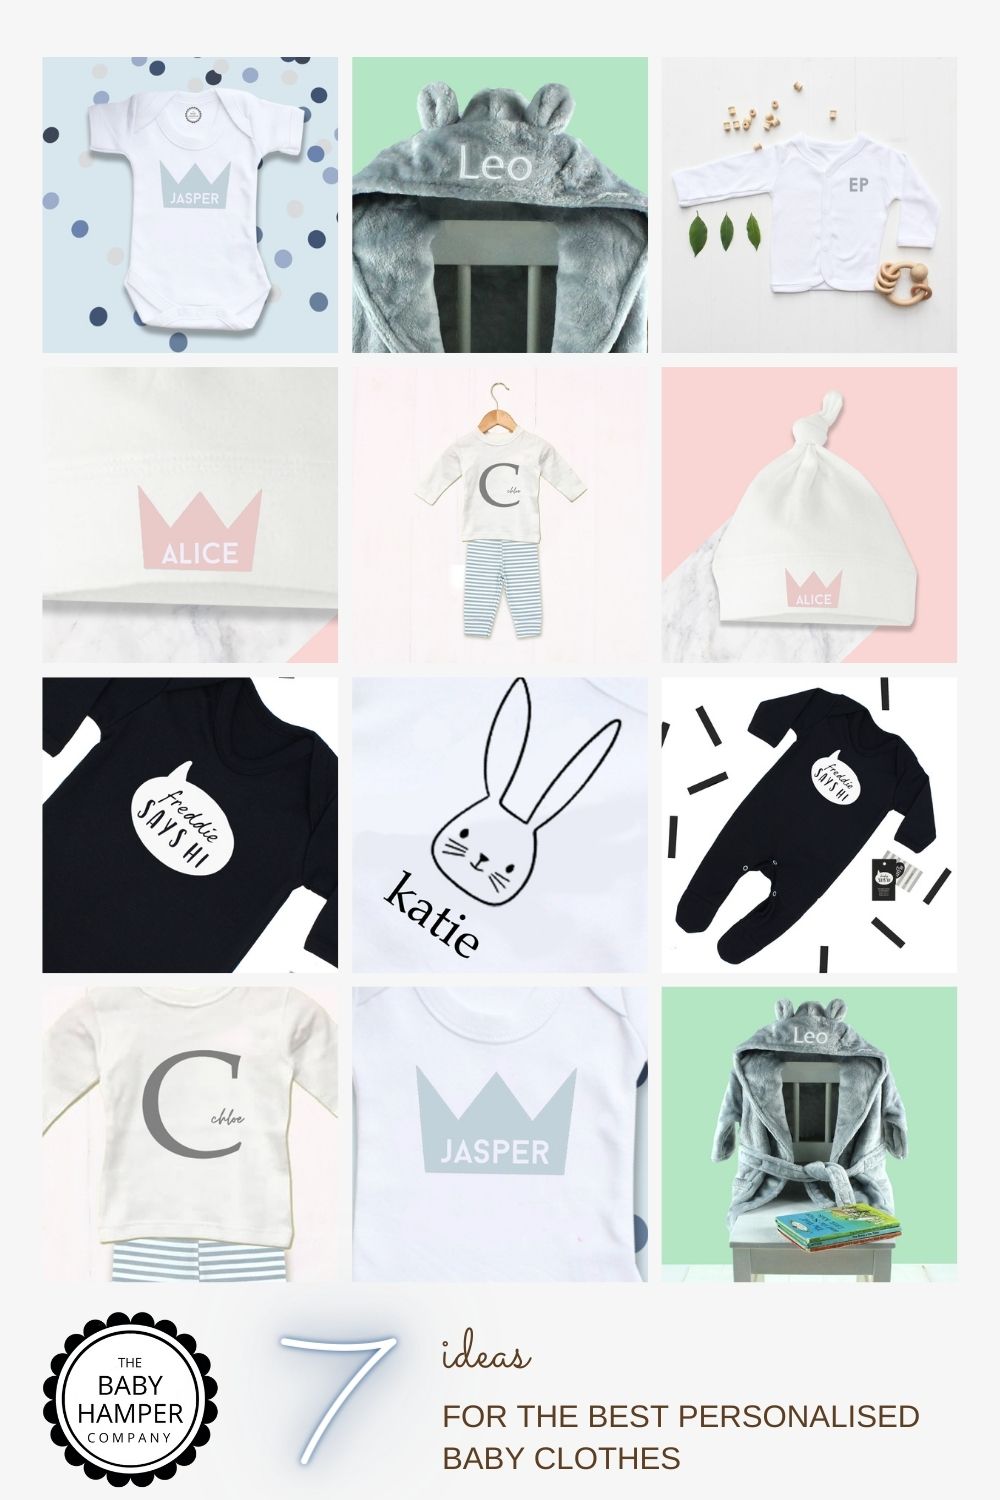 7 Ideas For The Best Personalised Baby Clothes